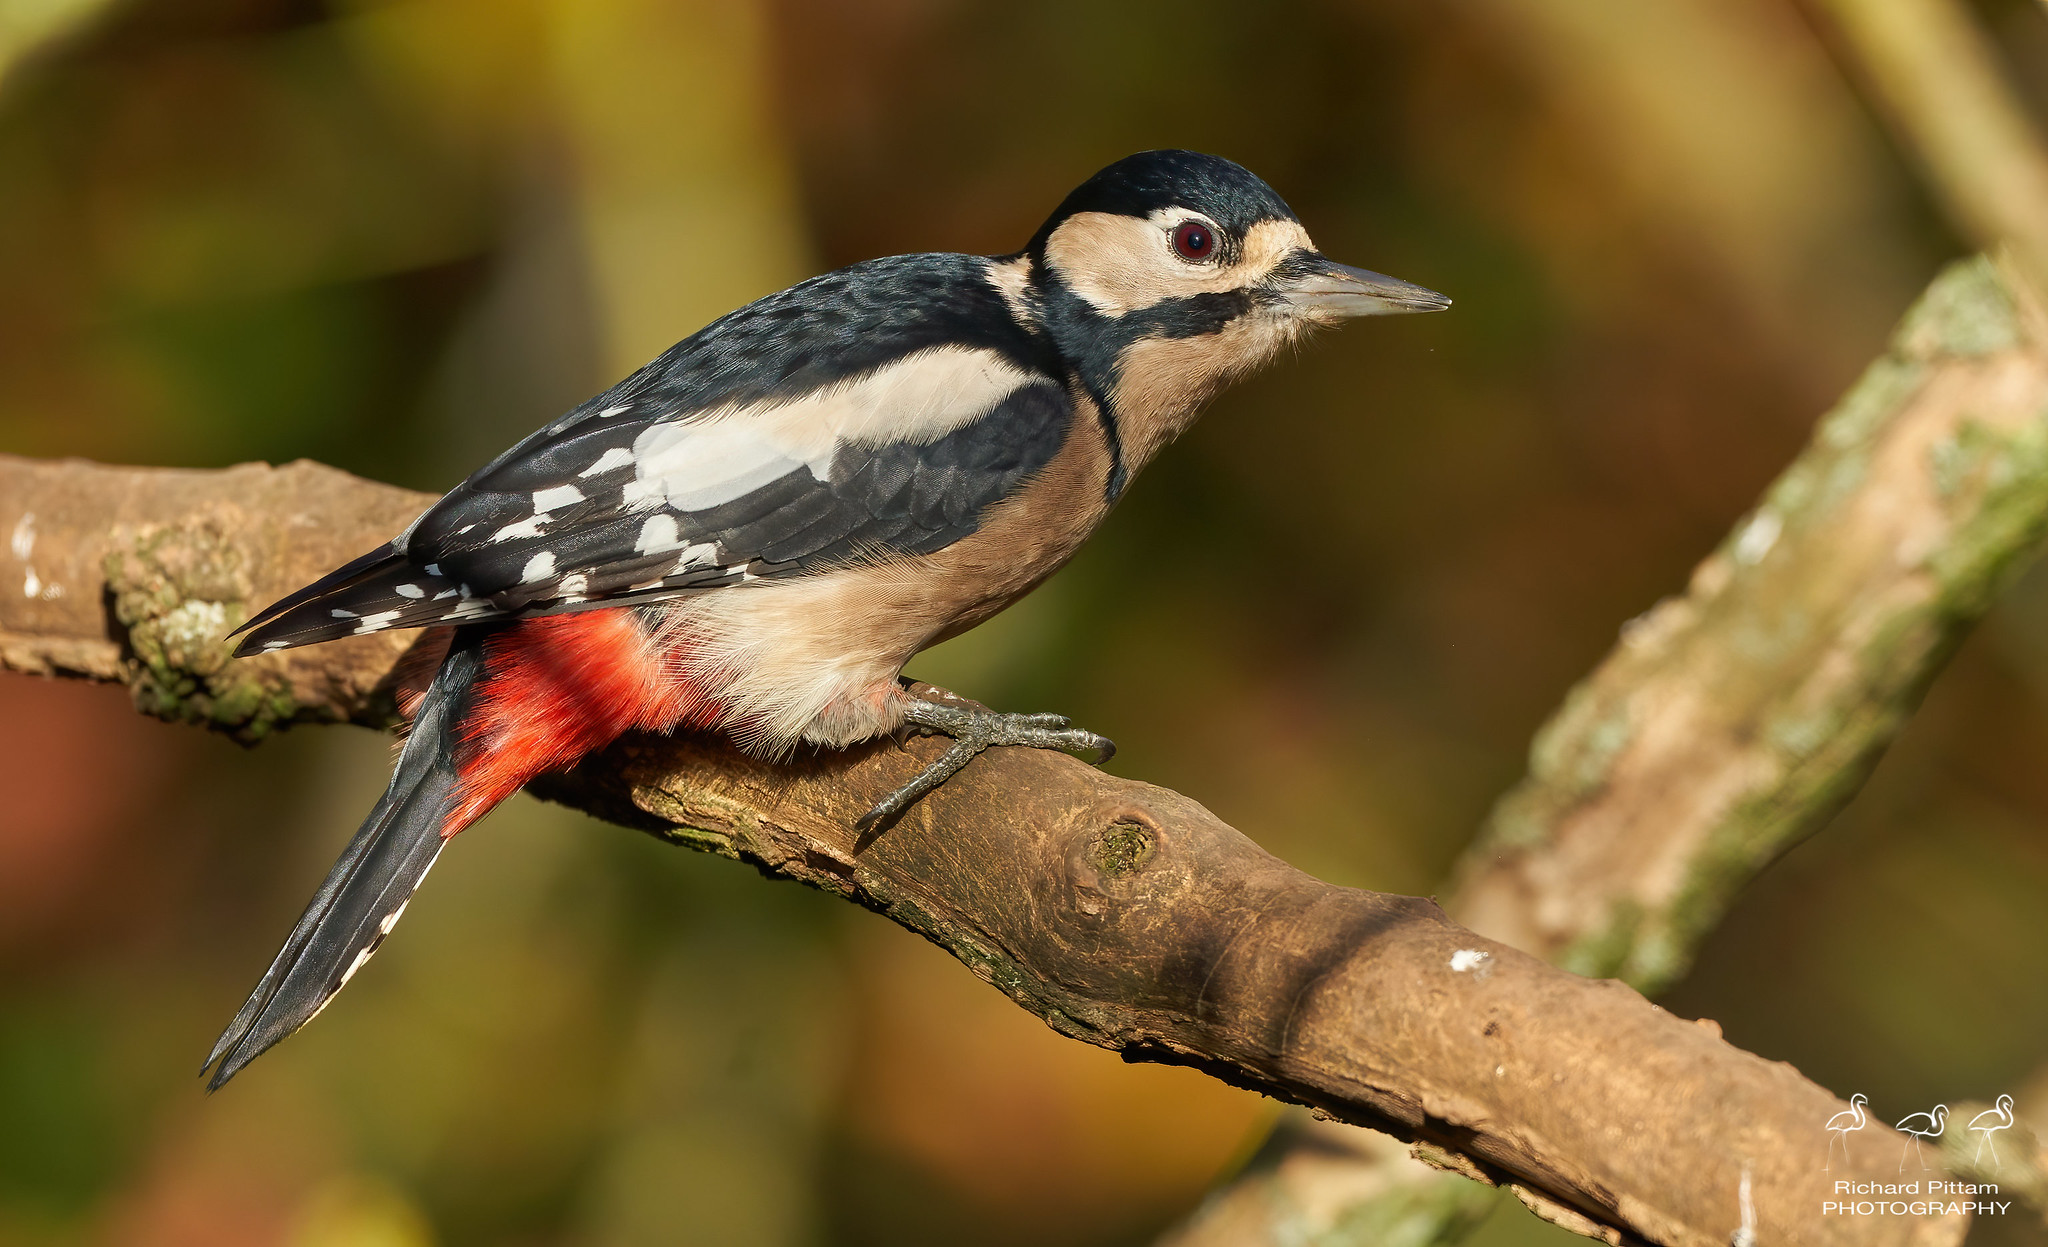 Great Spotted Woodpecker - i wish there were less branches there, but apparently a change may make this happen next few months.